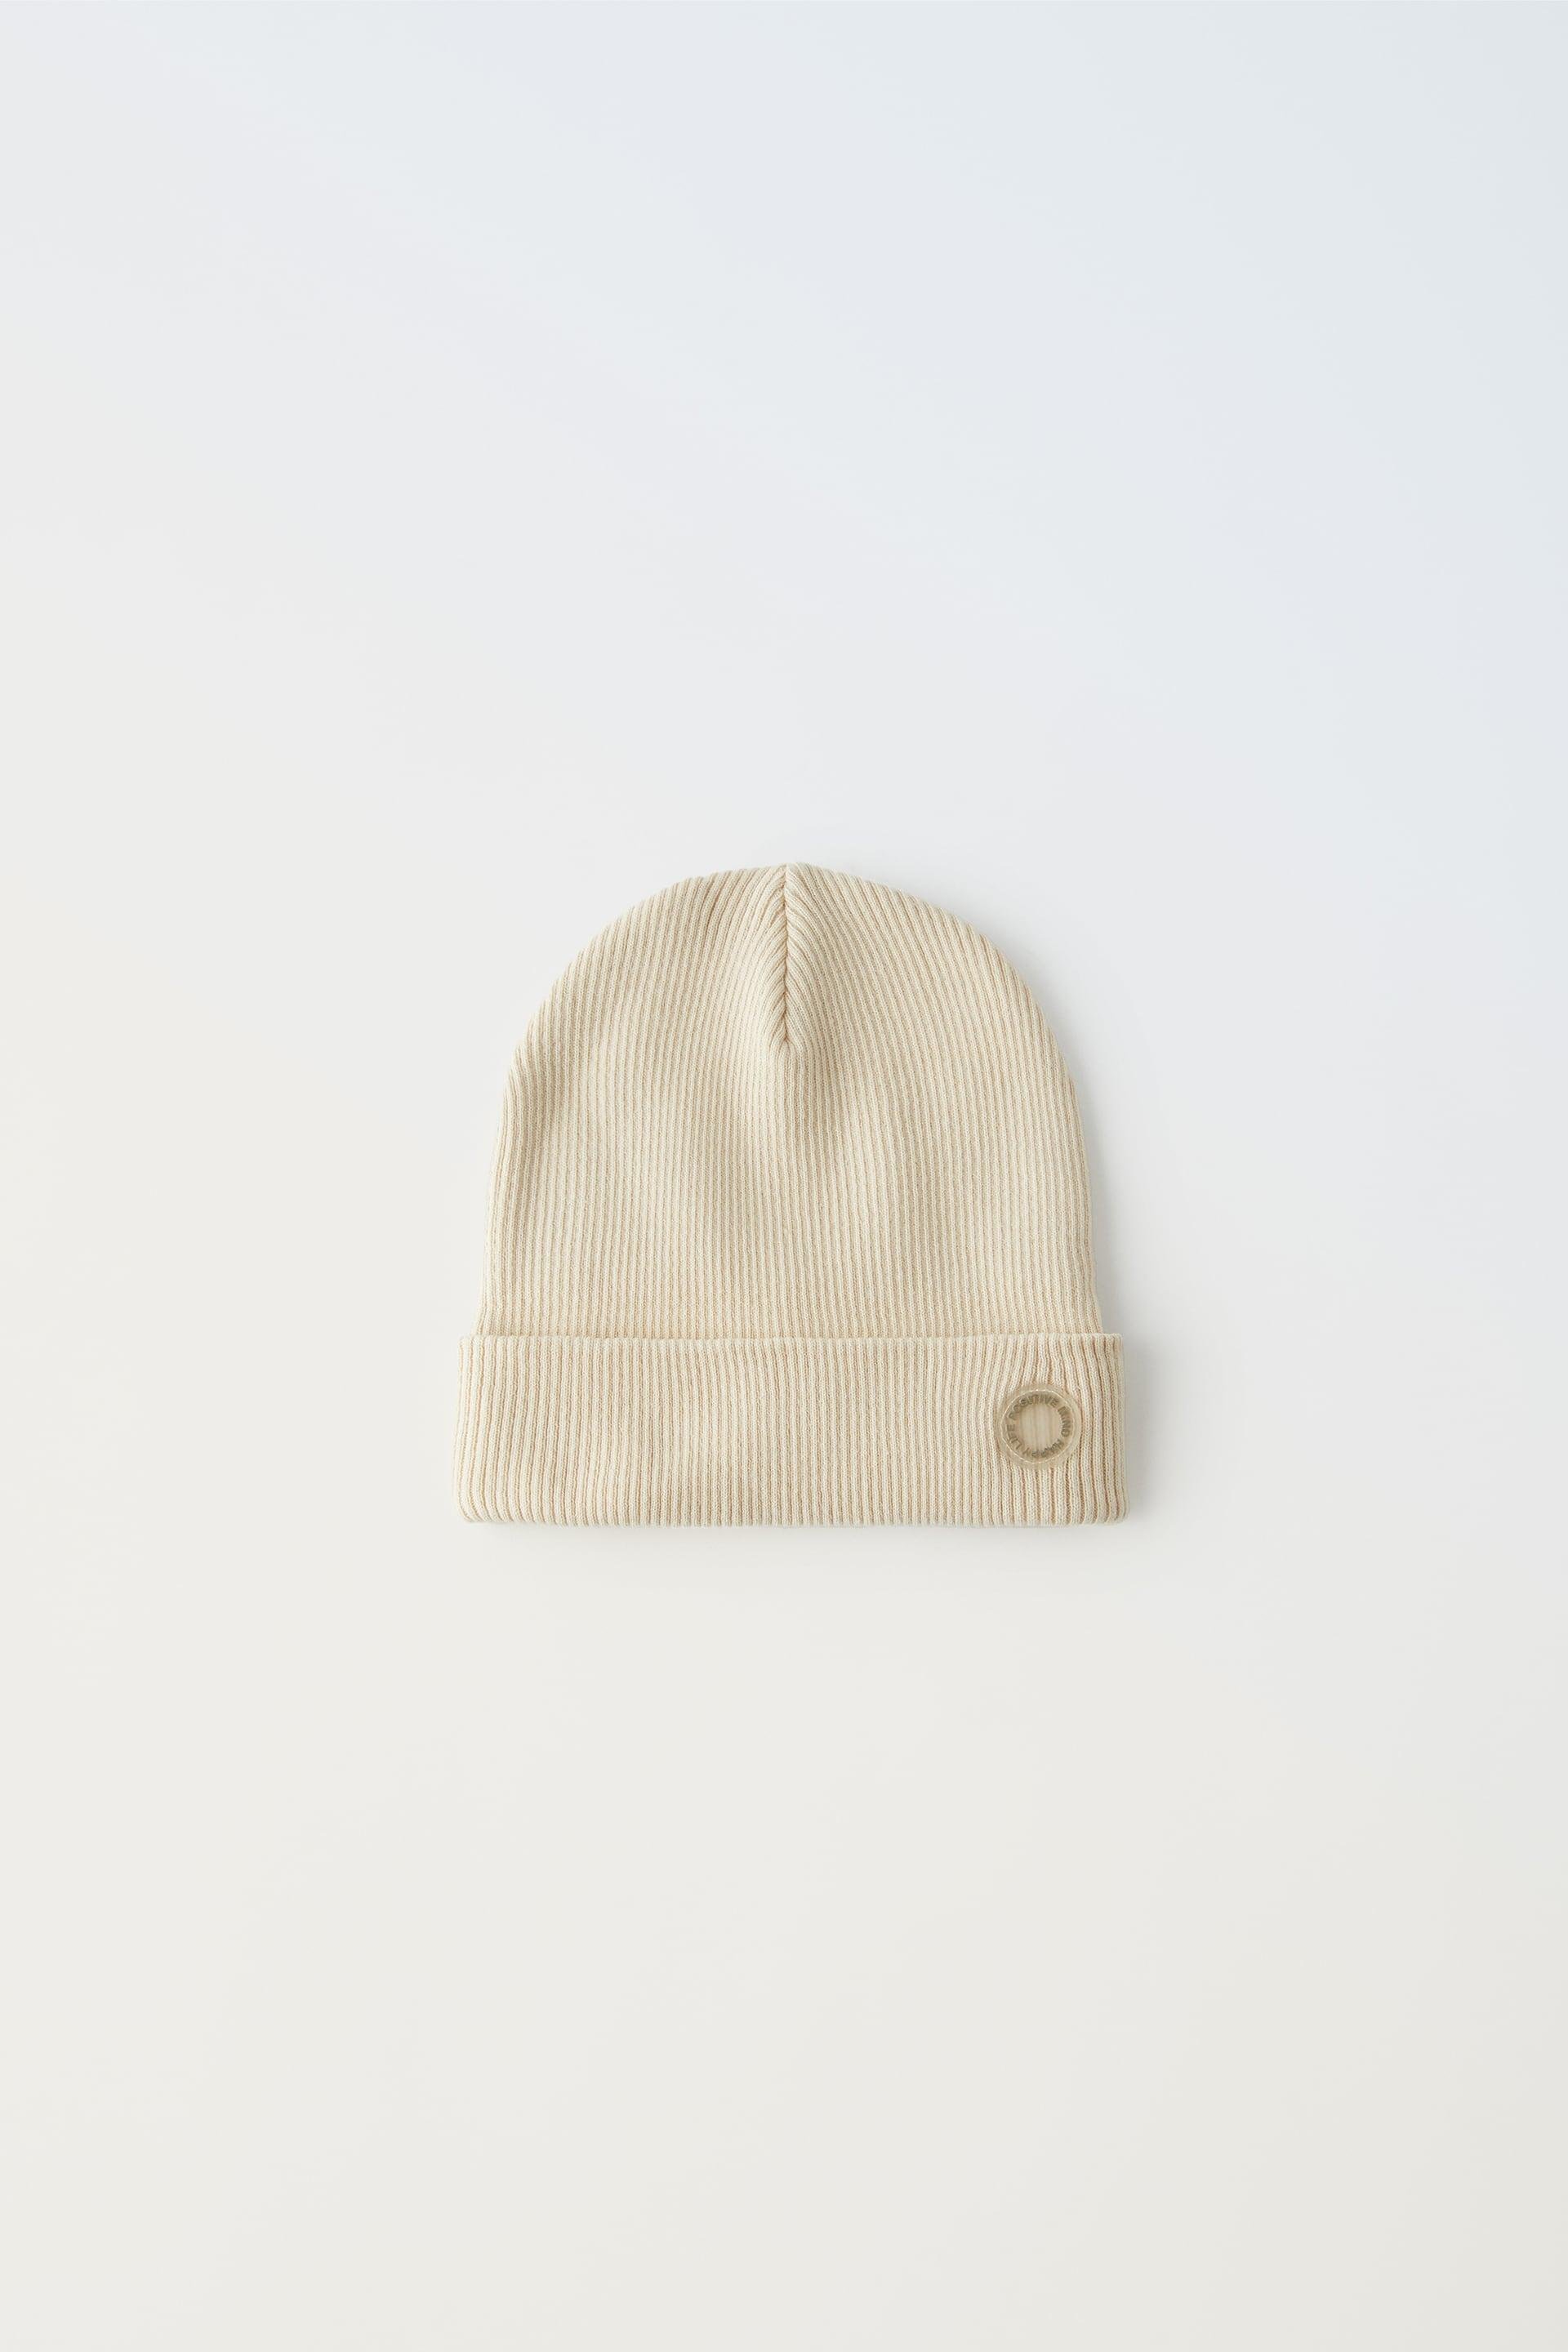 RIBBED COTTON HAT by ZARA